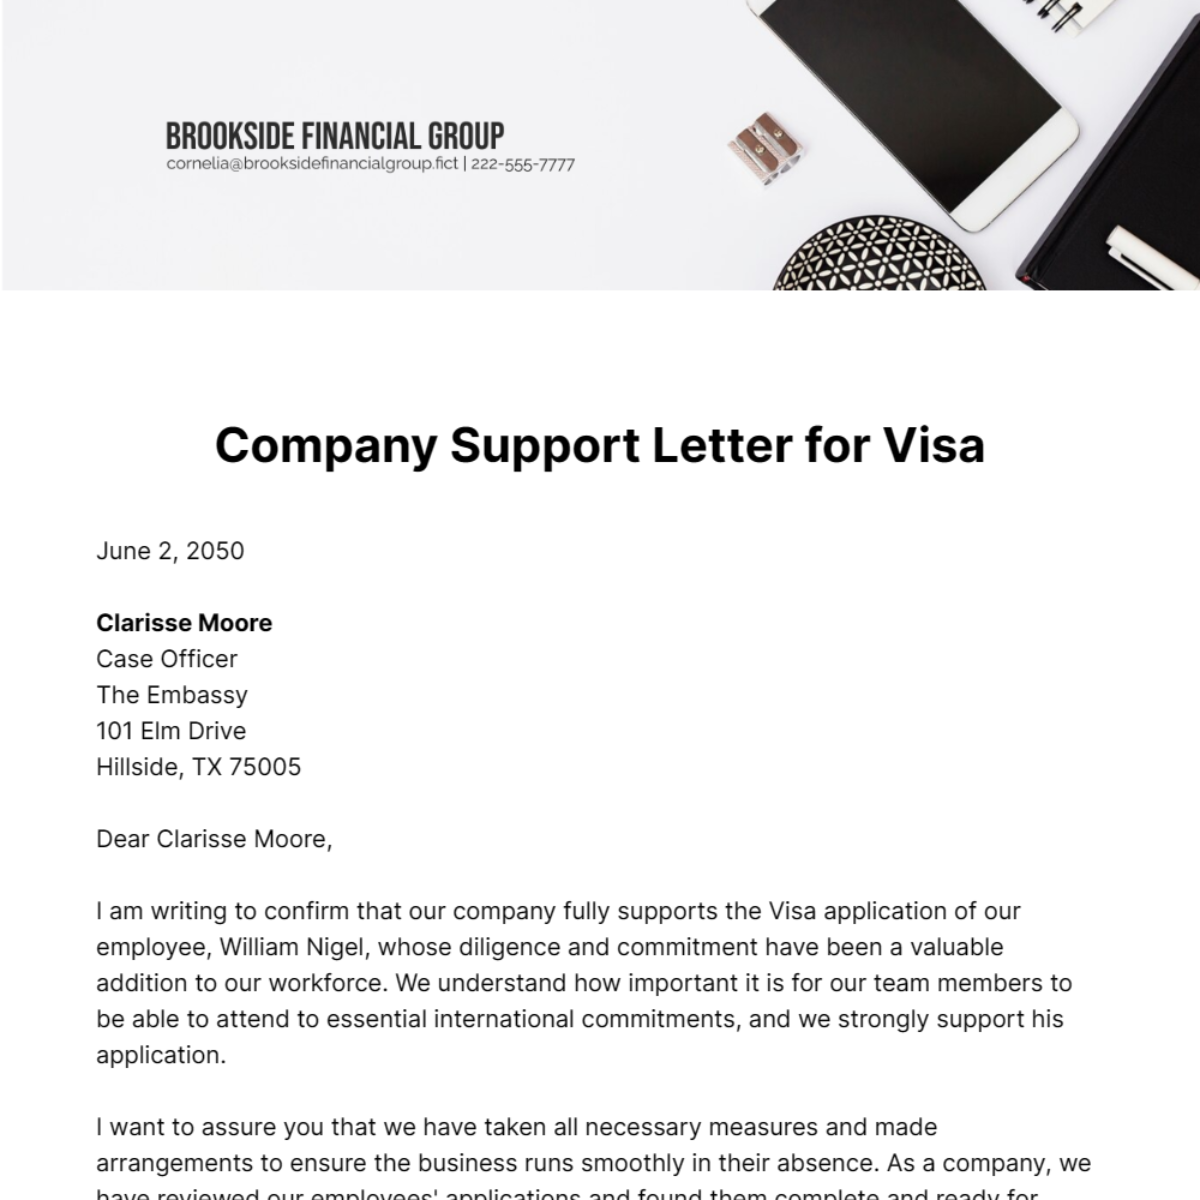 Company Support Letter for Visa Template